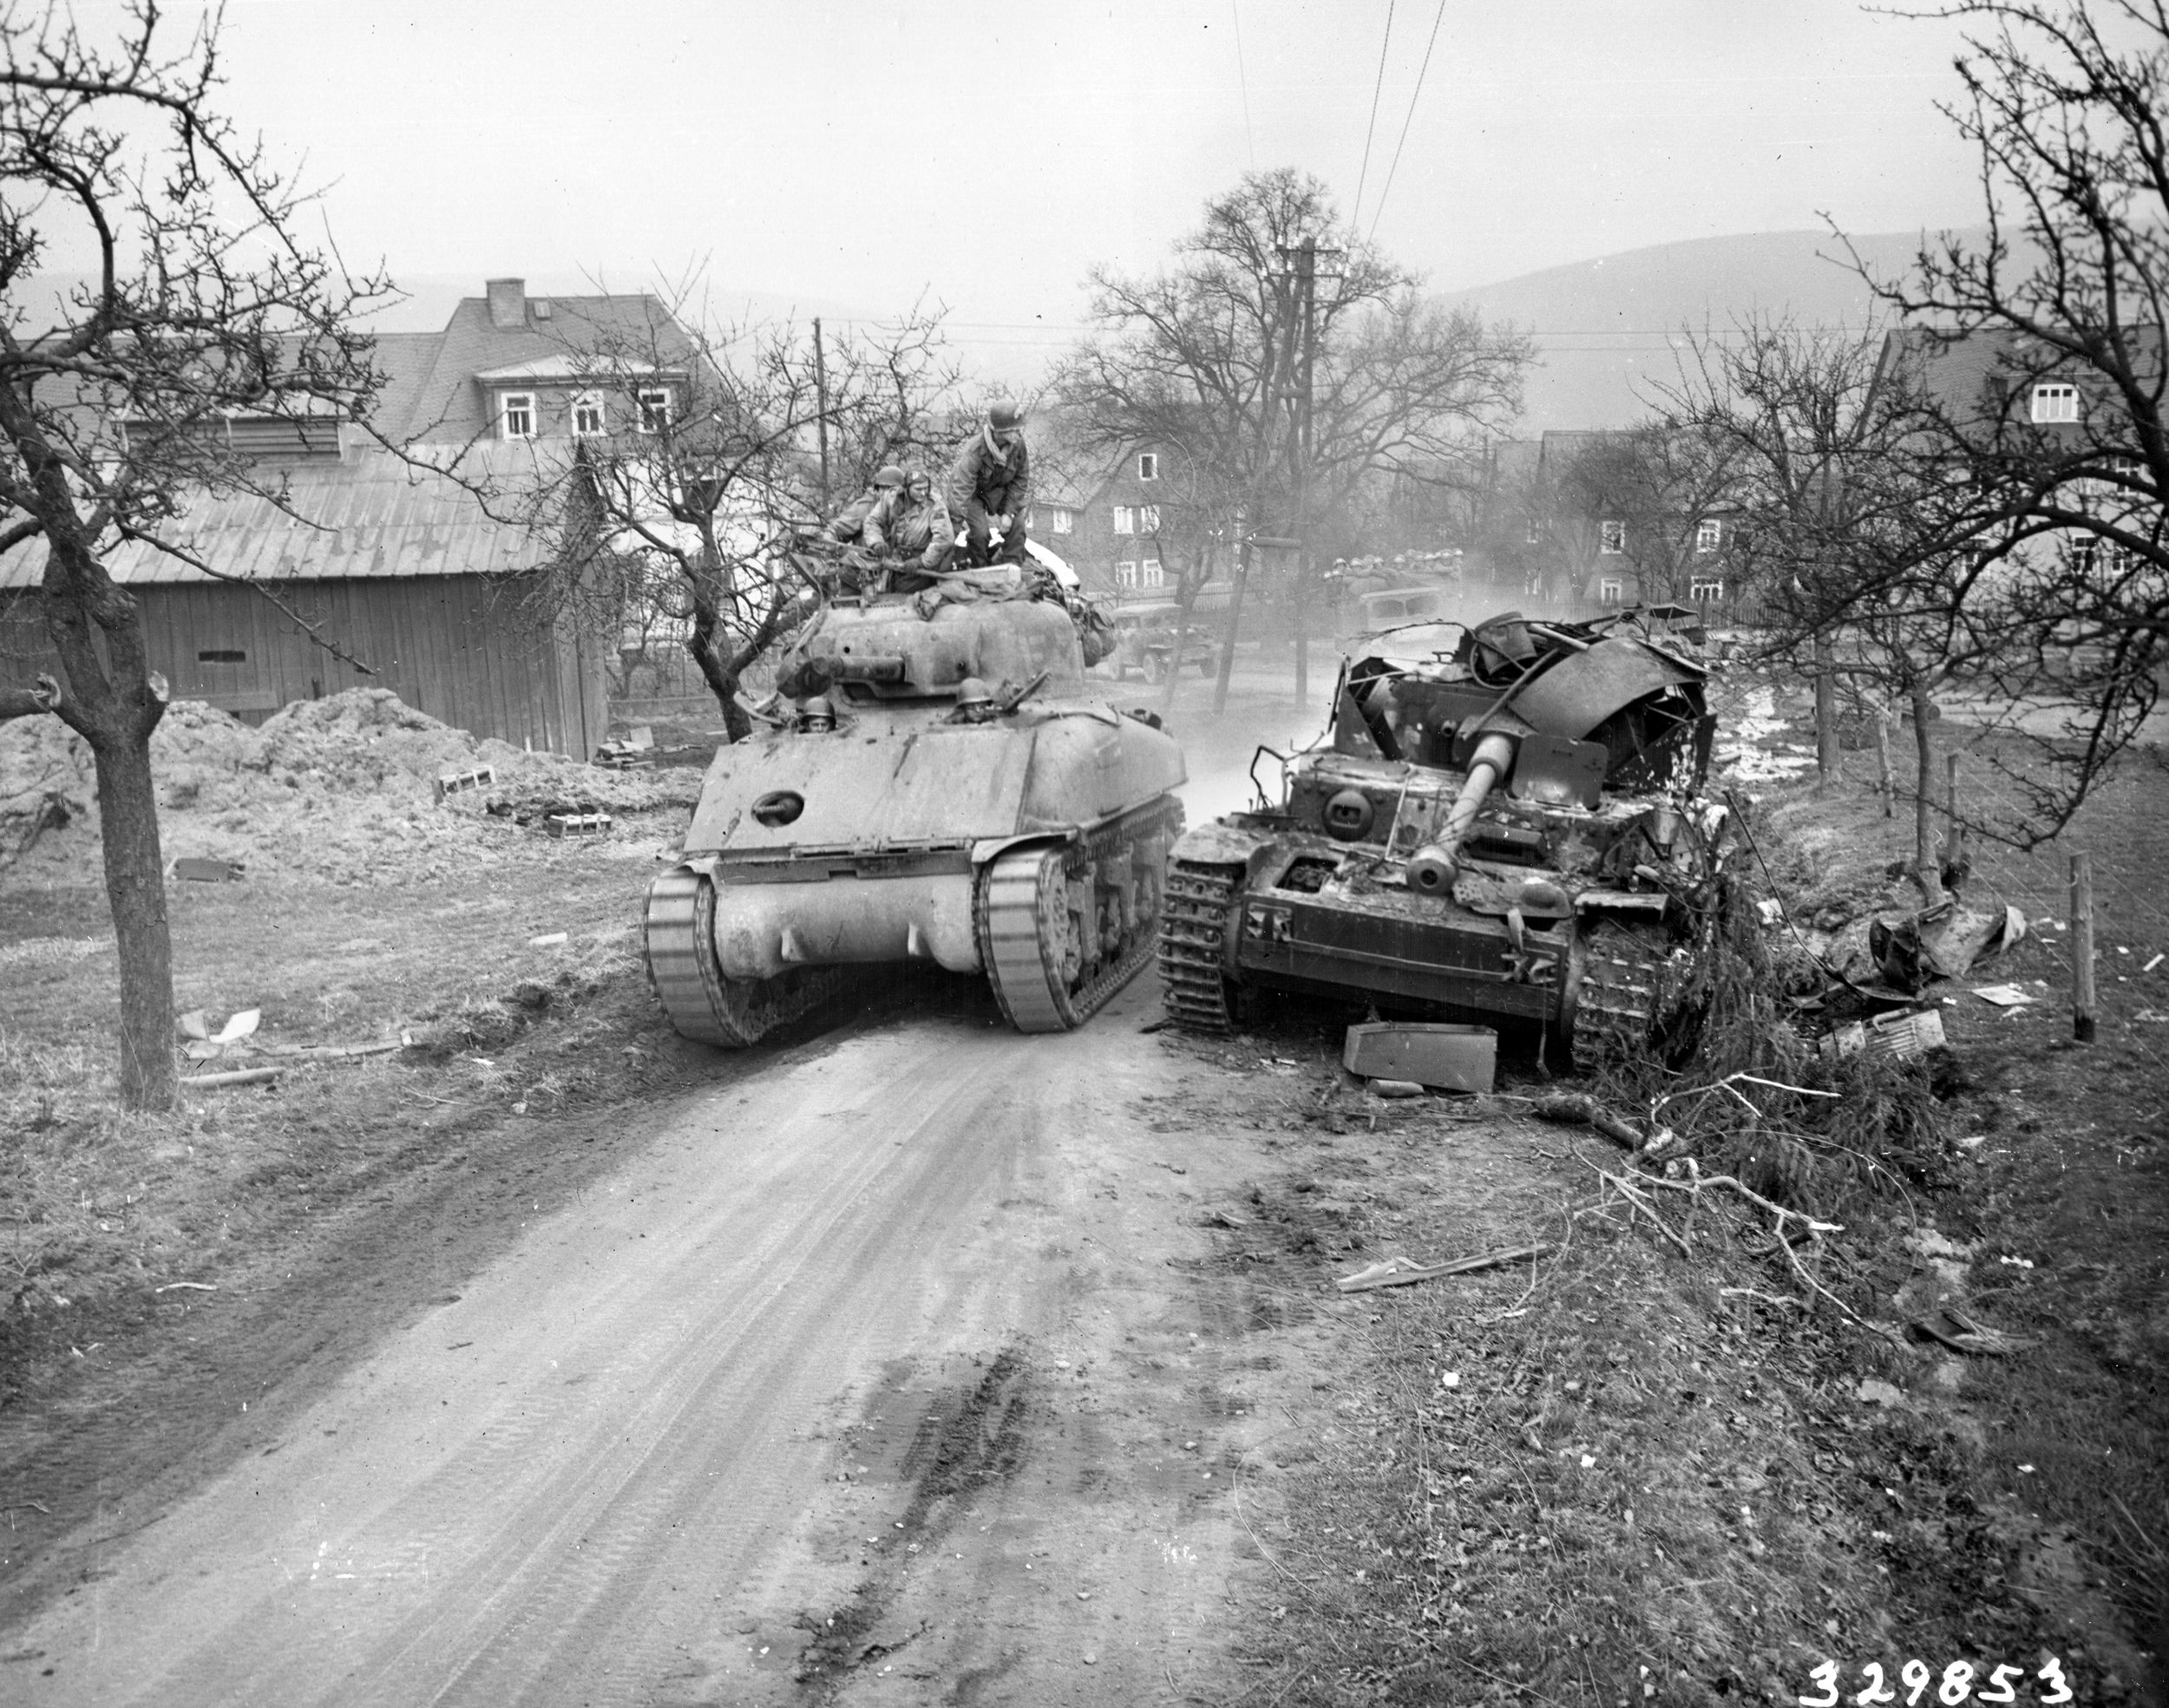 Crewmen of a 3rd Armored Division M4 glance at the burned and blasted remains of a Pz.Kpfw IV tank near Marienburg, Germany, March 28, 1945. The Germans could not match the Americans’ ability to repair their tanks and quickly get them back into action.